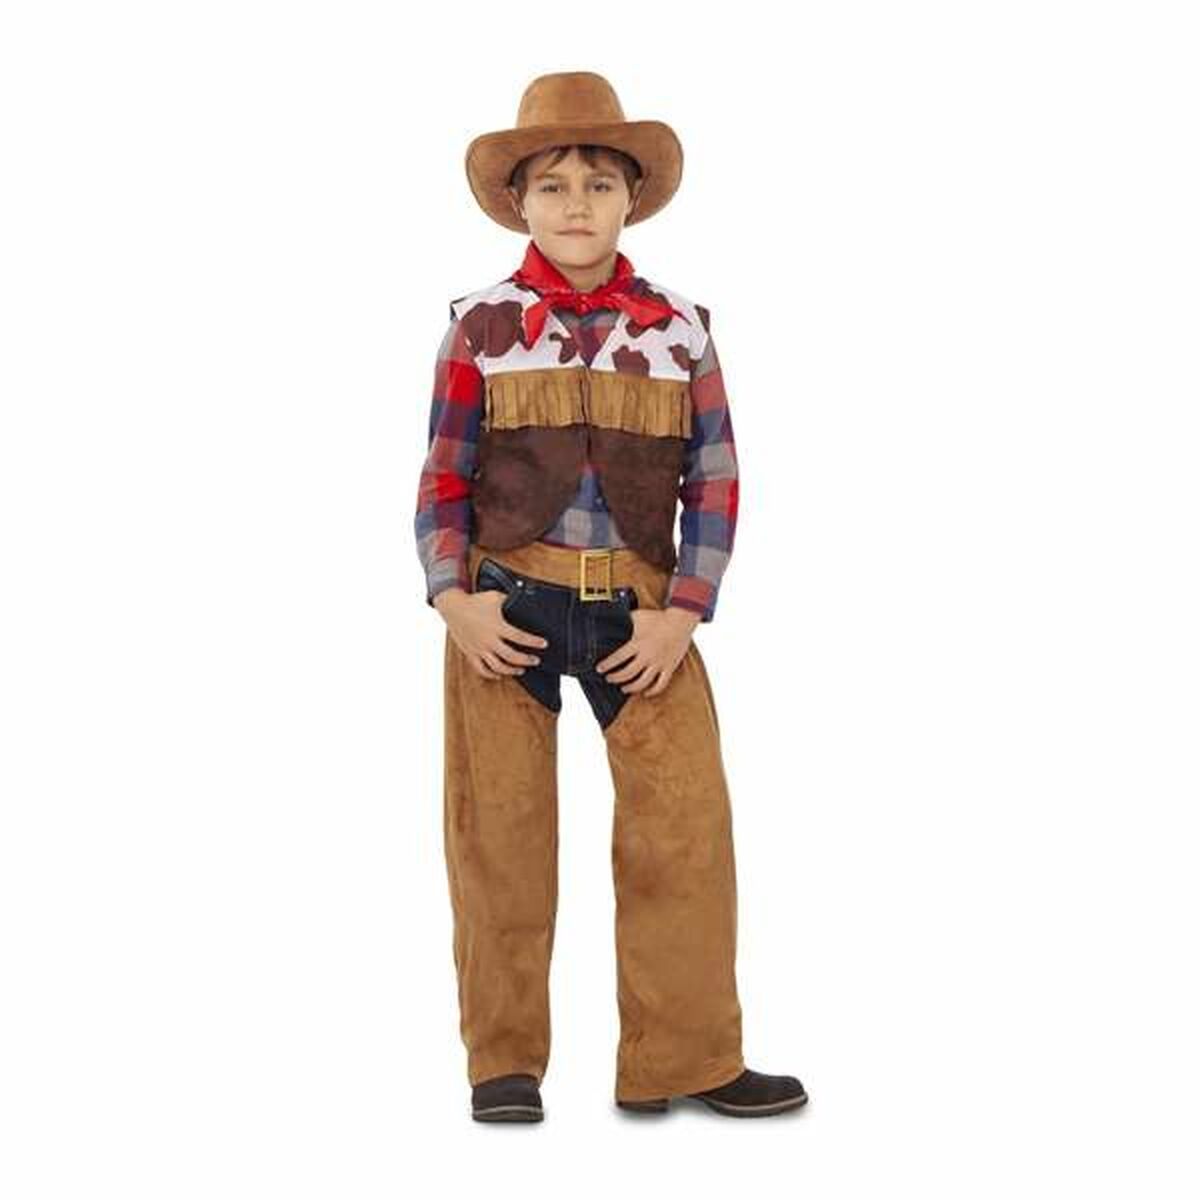 Costume for Children My Other Me Cowboy